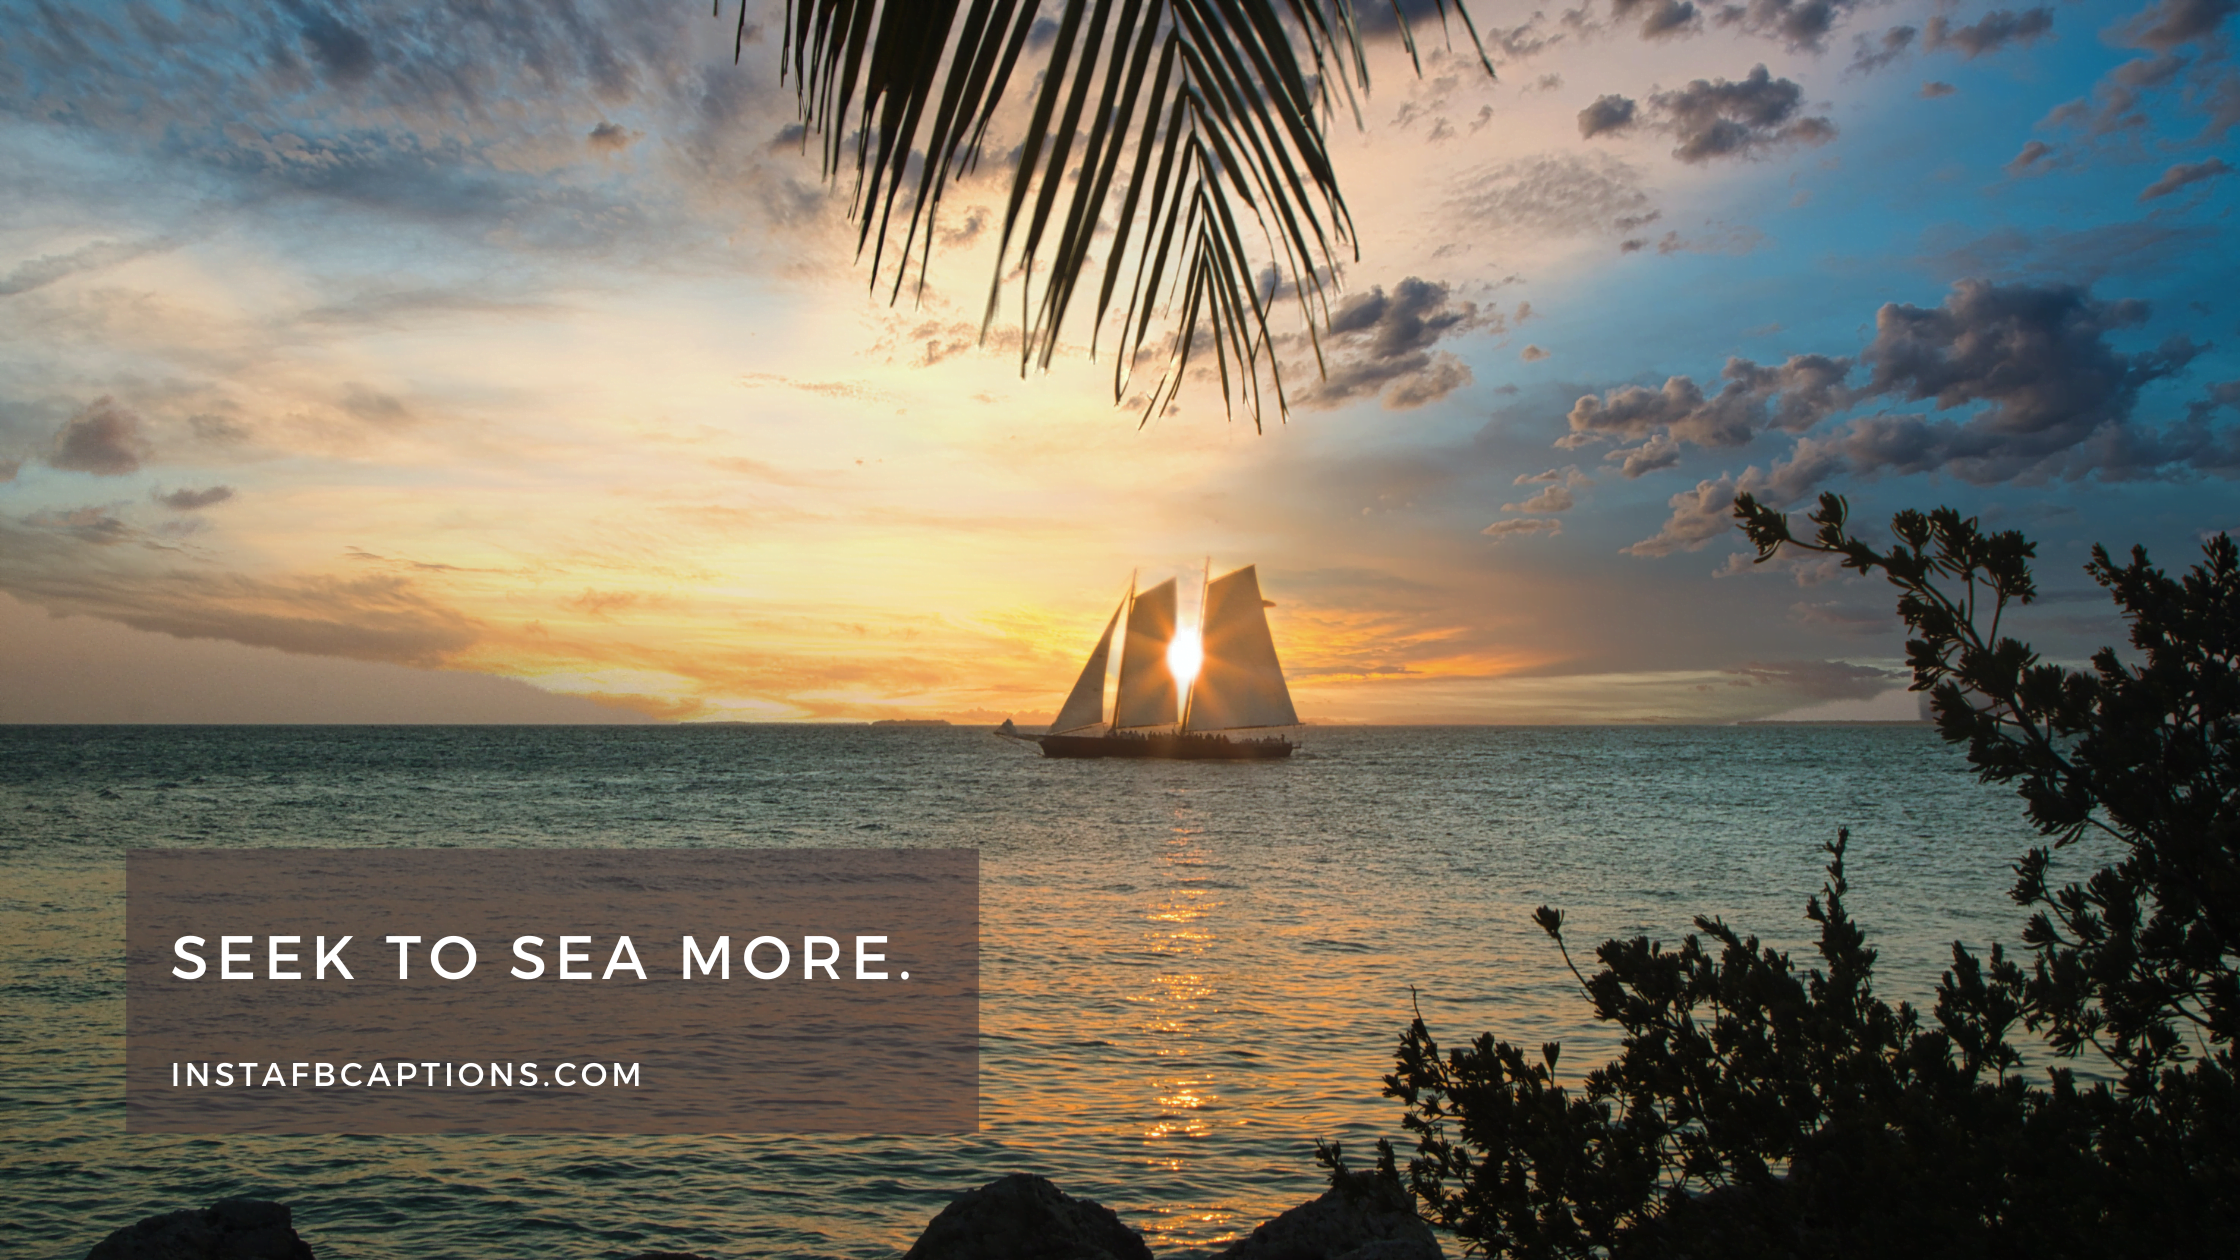 Seek to sea more.  - Best Key West Captions  - 98 Key West Quotes, Captions, Puns, Phrases for 2023